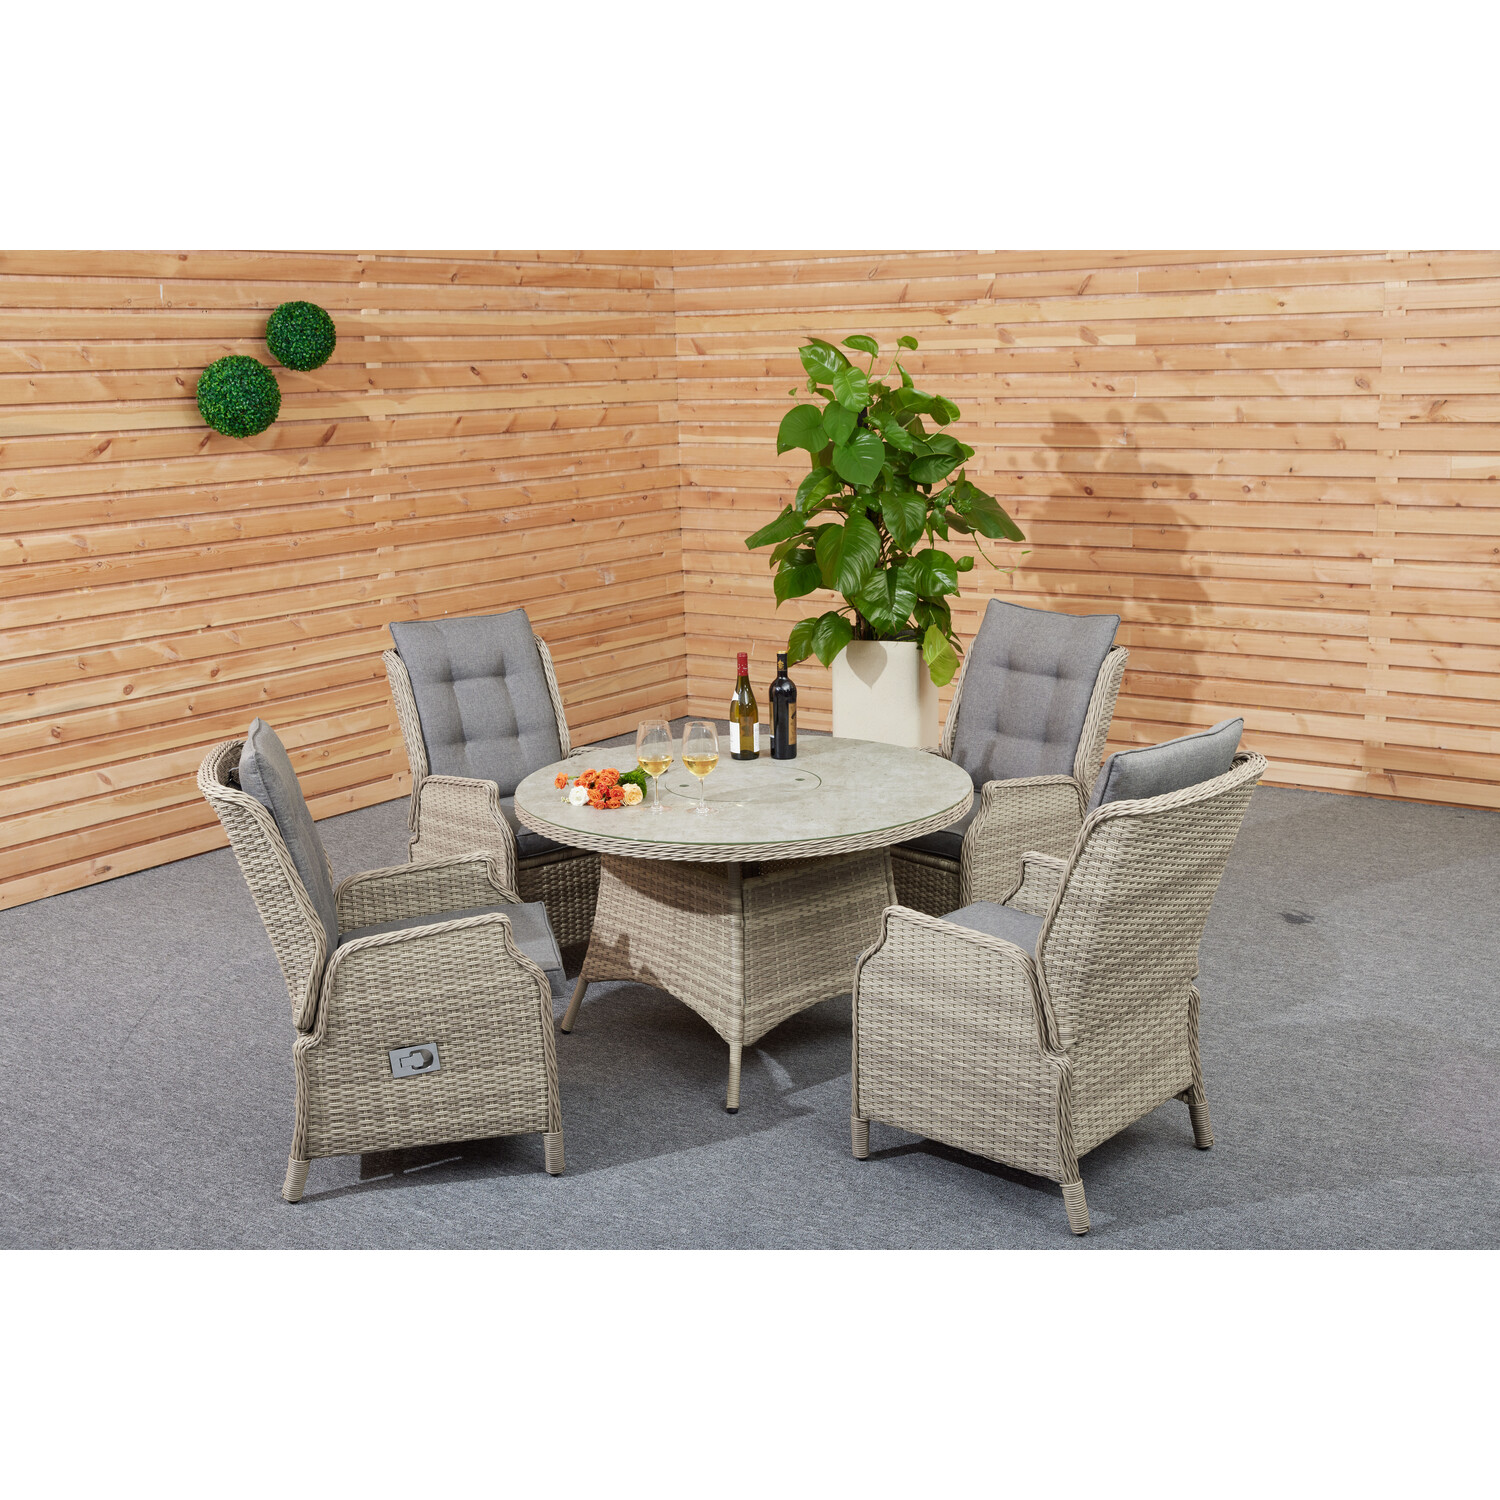 Malay Deluxe Malay Deluxe Cambridge Wicker 4 Seater Reclining Dining Set Natural Image 7